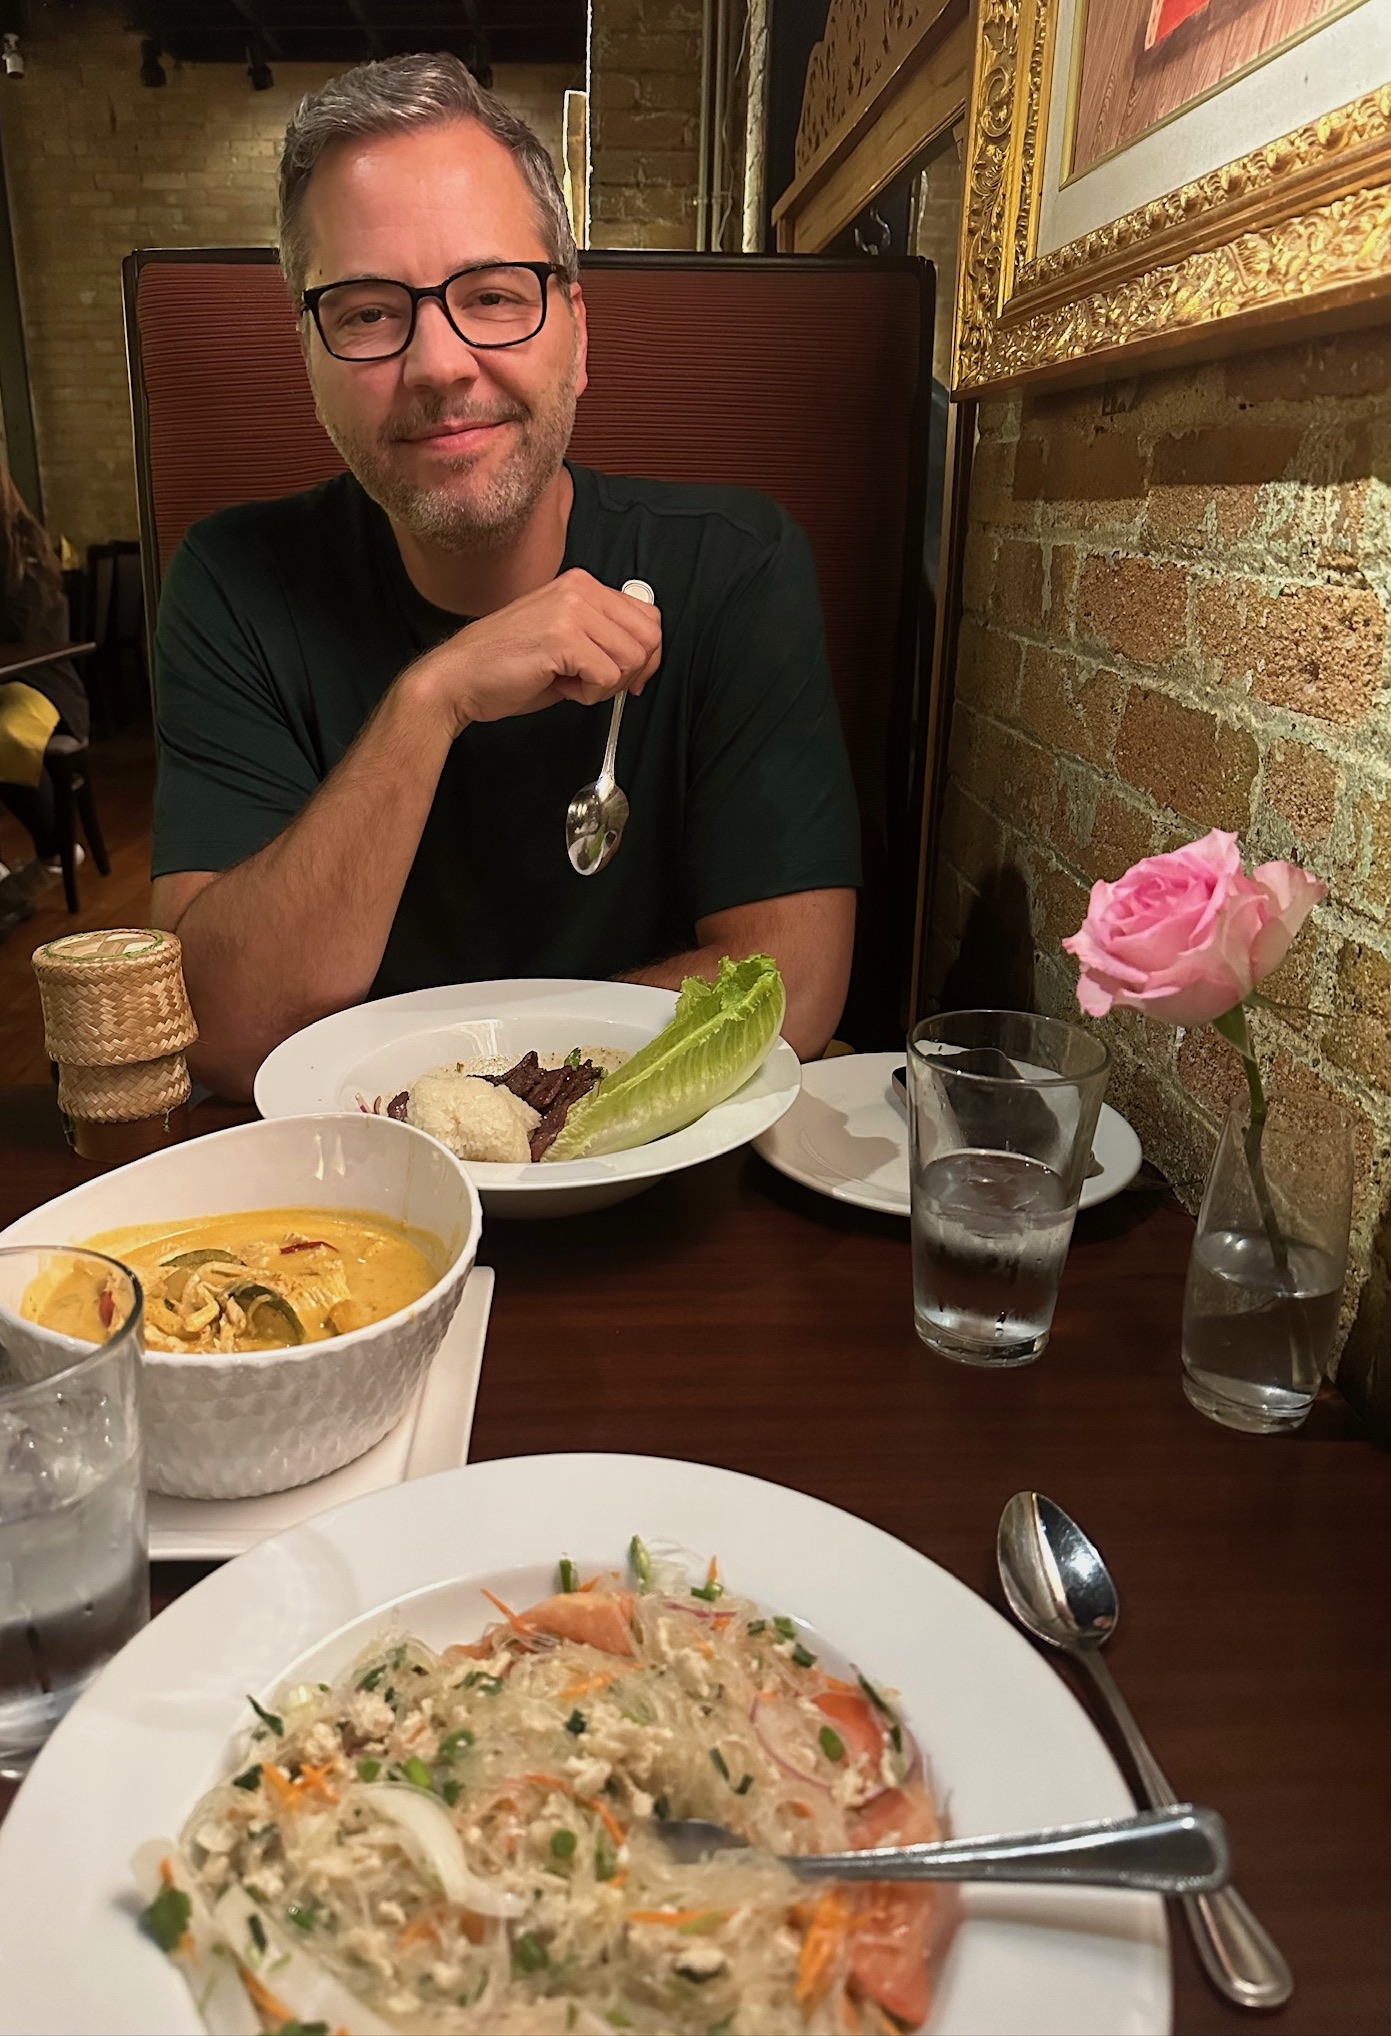 Chris Loves Julia | 12 Staycation Ideas for Spring Break and Summer | Dine in a local restaurant